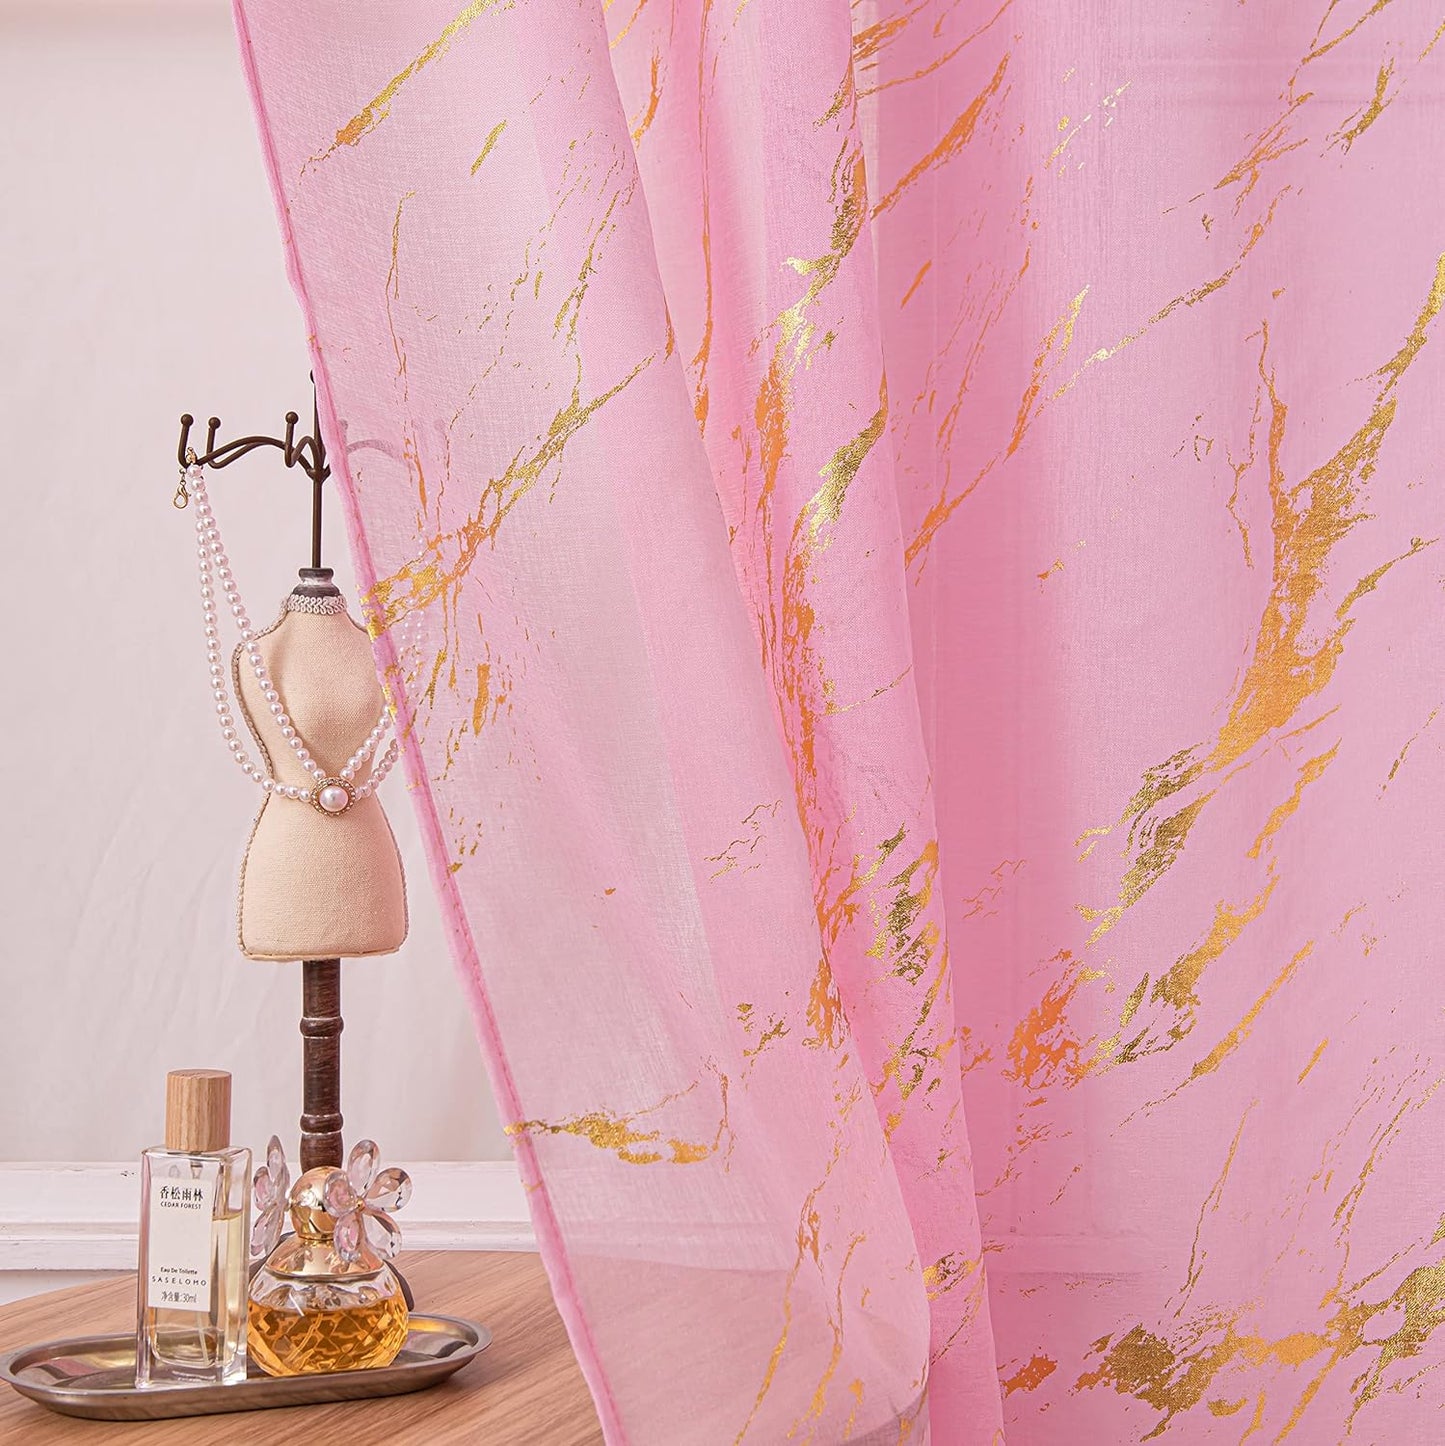 Sutuo Home Marble White Sheer Curtains 84 Inch Length, Gold Foil Print Metallic Bronzing, Privacy Window Treatment Decor Abstract Drape Pair 2 Panels Set for Bedroom Kitchen Living Room 52" W X 84" L  Sutuo Home Gold And Pink 52" W X 96" L, 2 Panels 